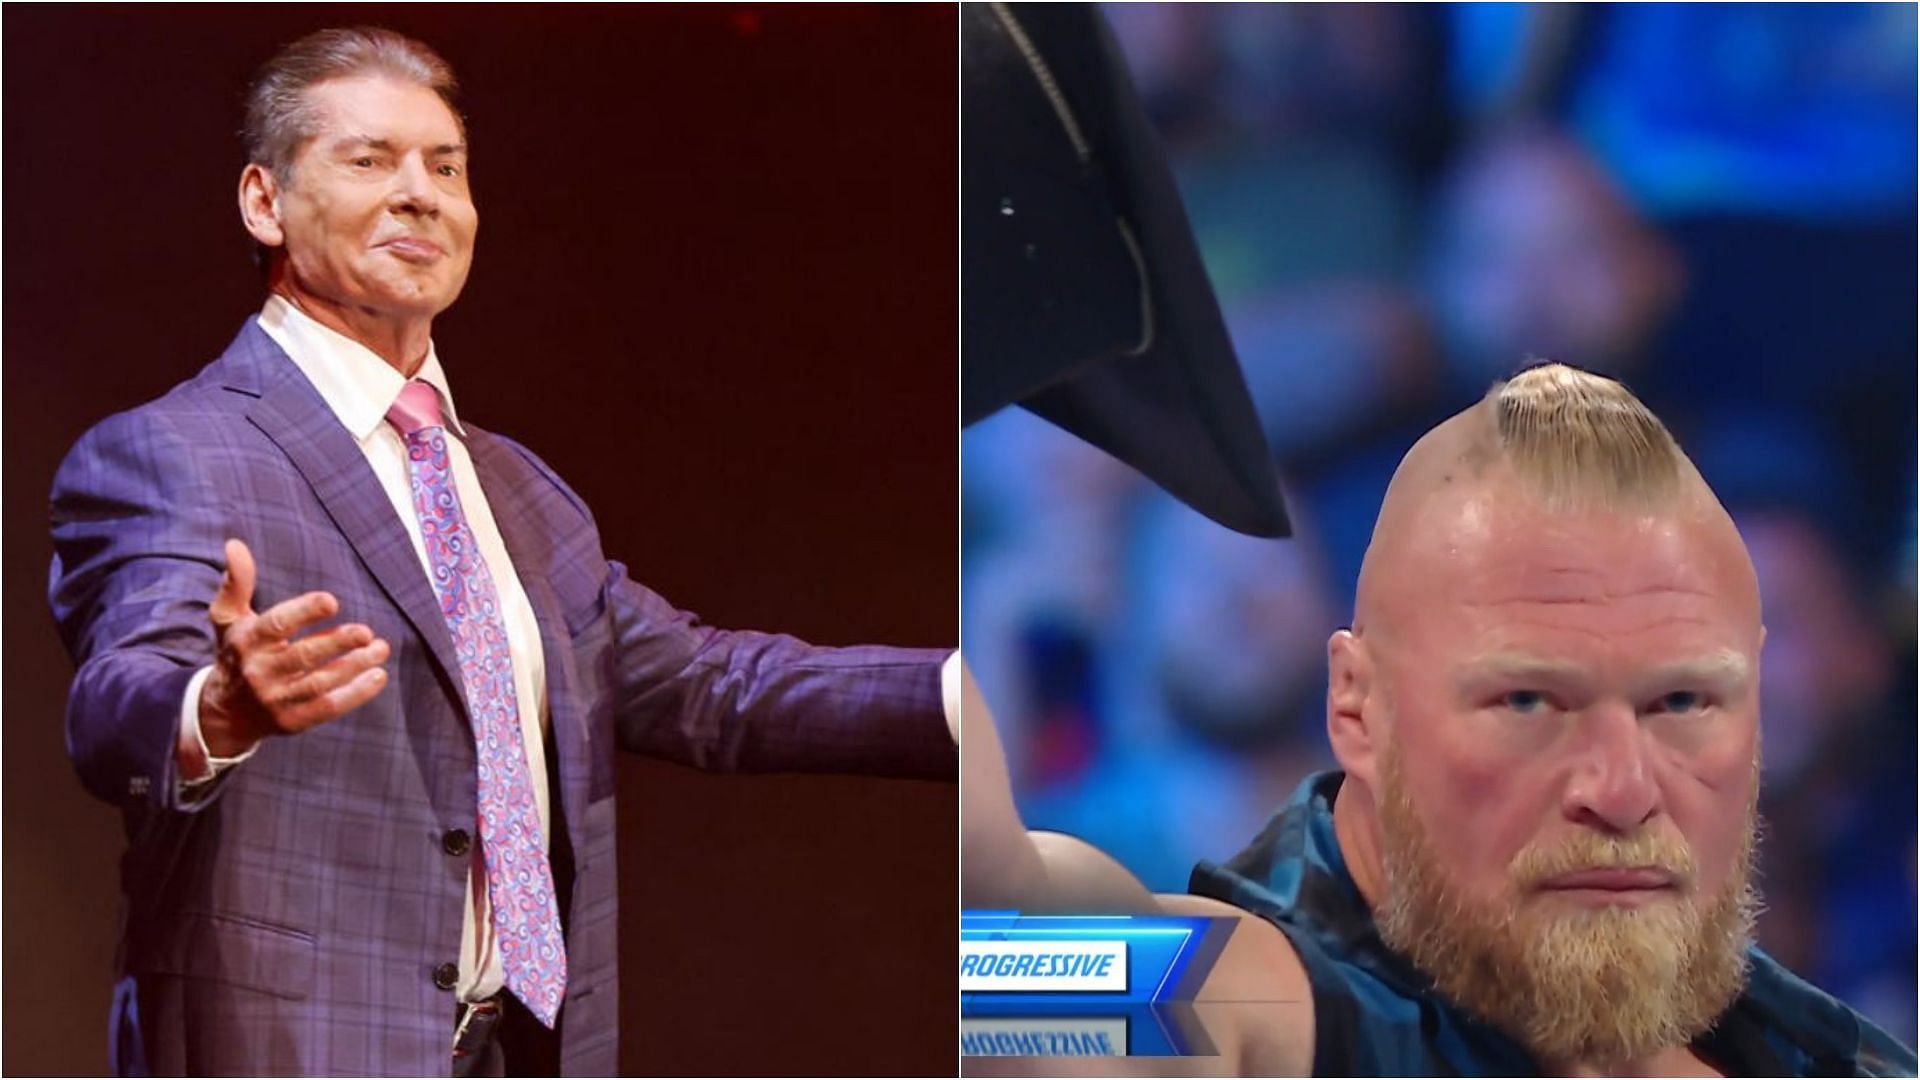 Vince McMahon and Brock Lesnar dominated the news